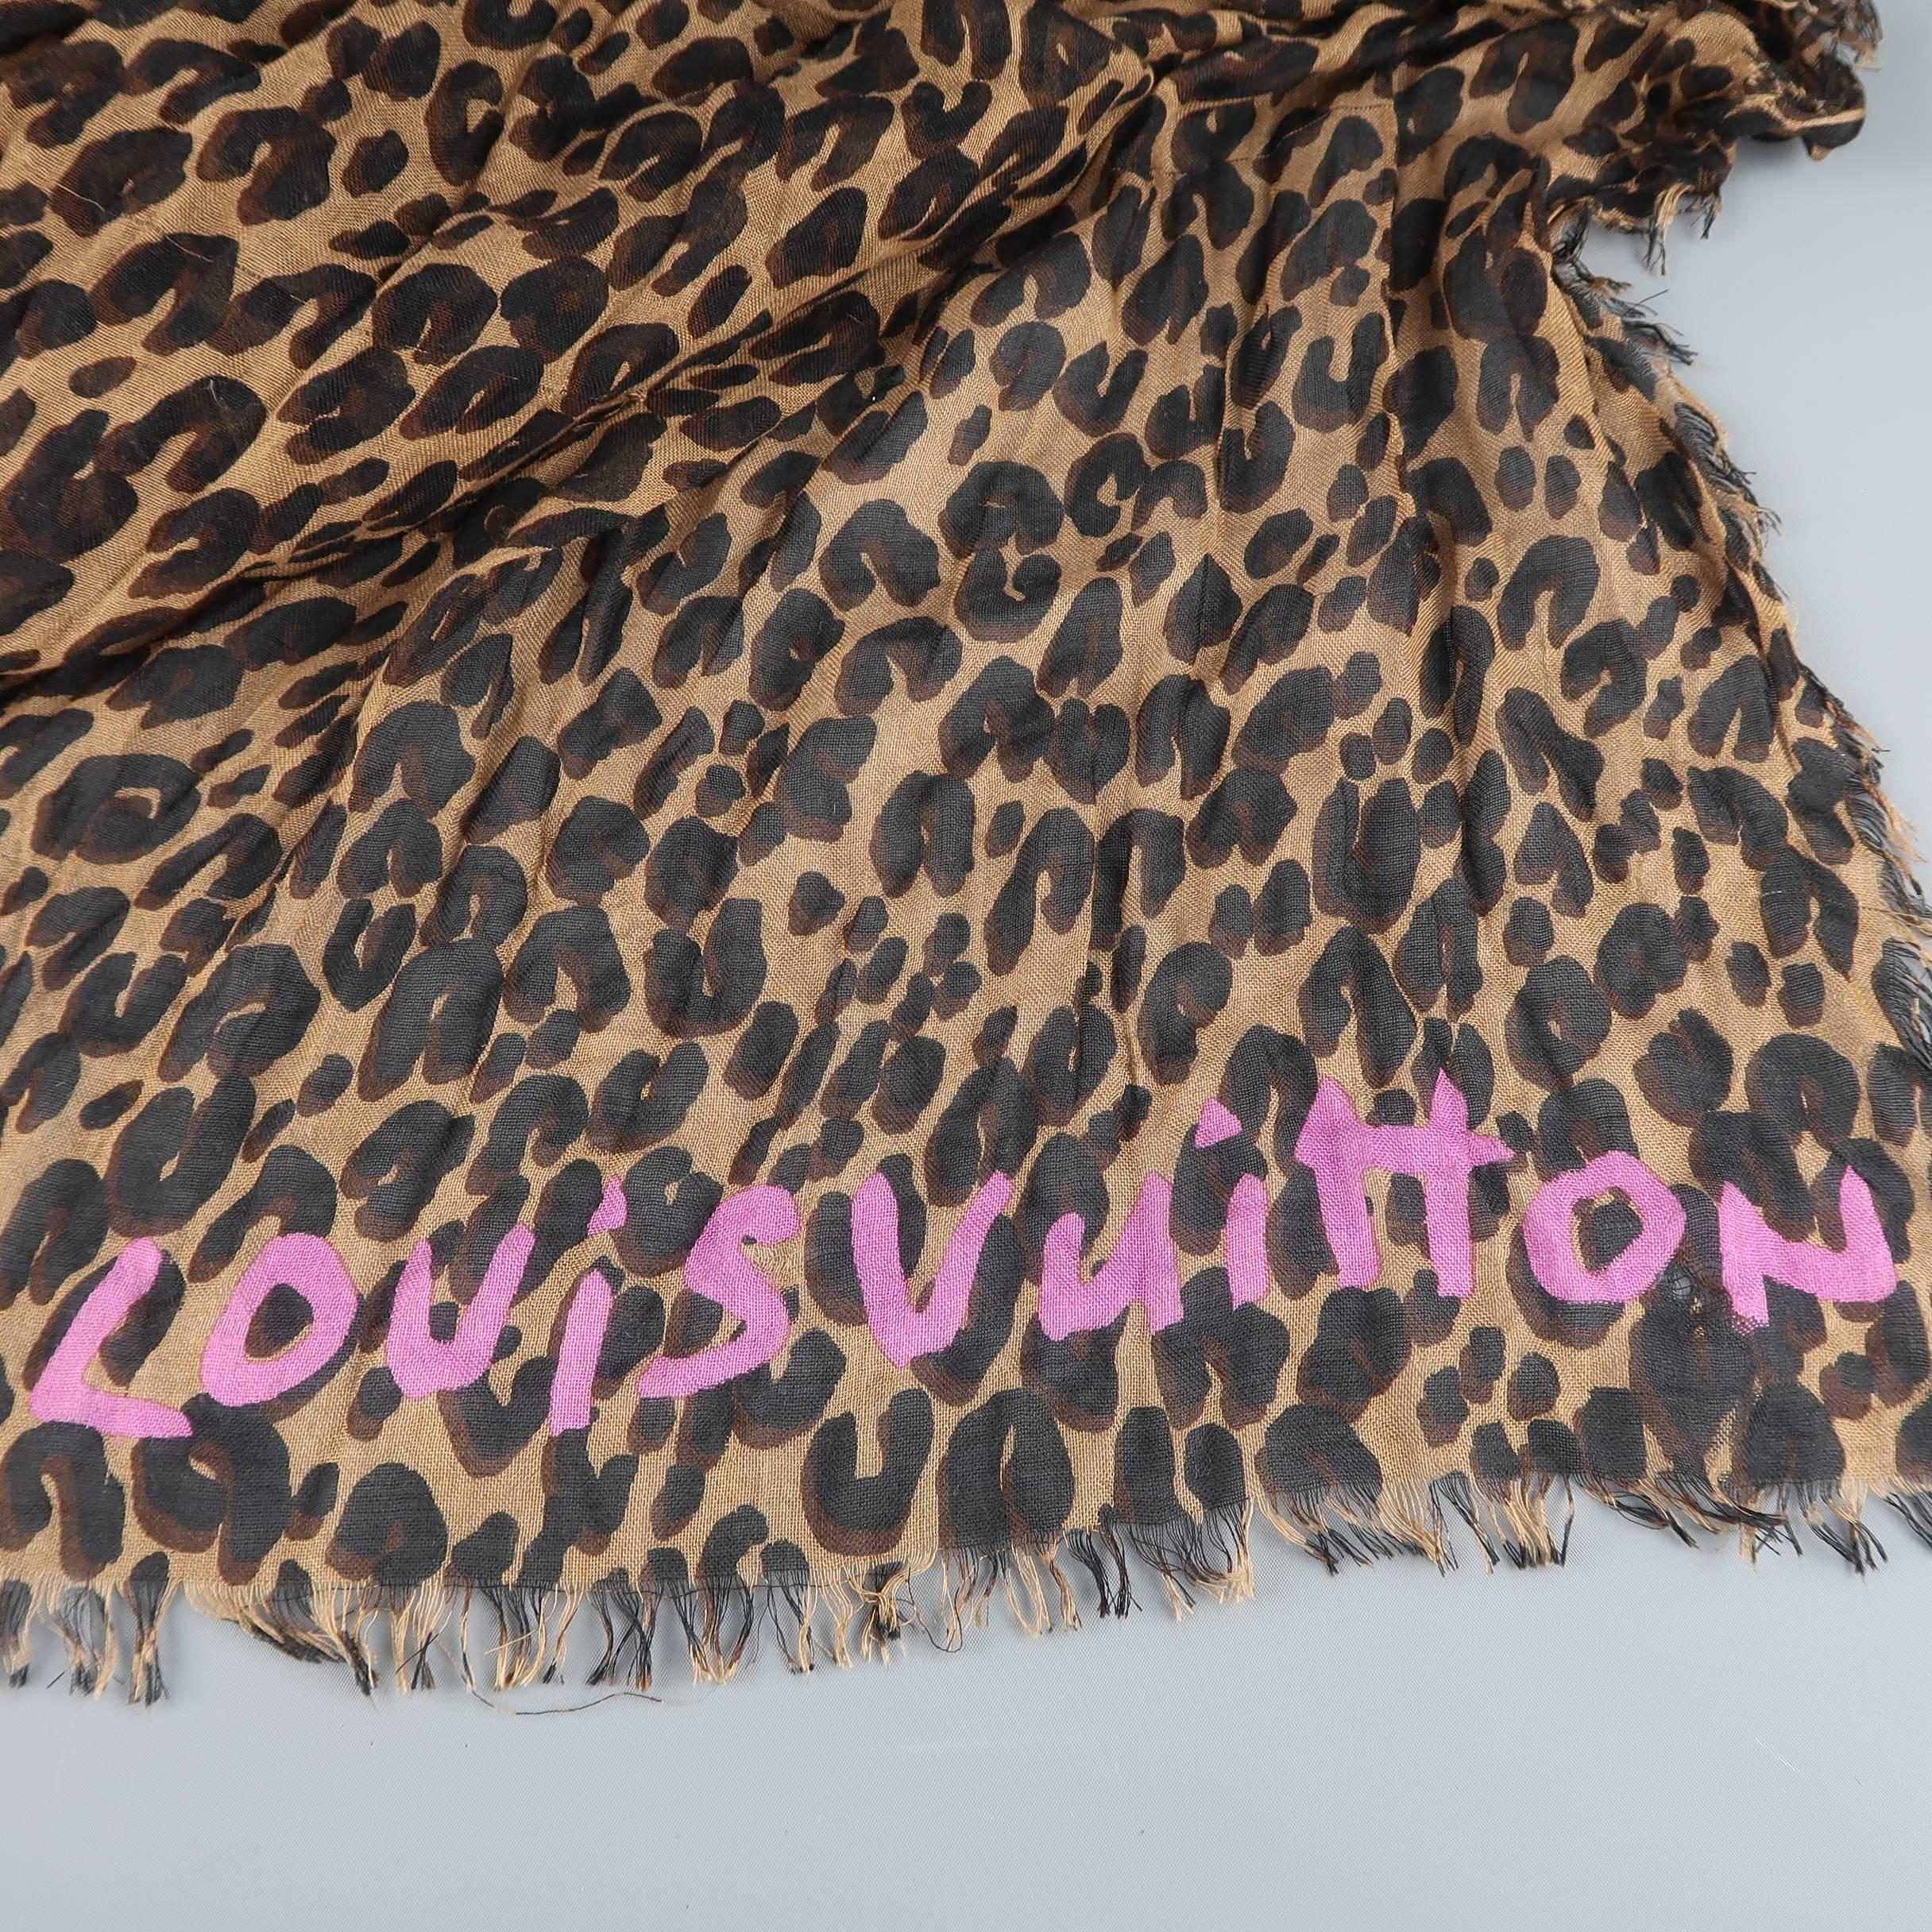 Rare and coveted LOUIS VUITTON x STEPHEN SPROUSE collaboration scarf comes in a cashmere silk blend light weight gauze material with all over leopard print, fringed edges, and pink graffiti logo. Minor runs throughout. As-Is. includes original dust